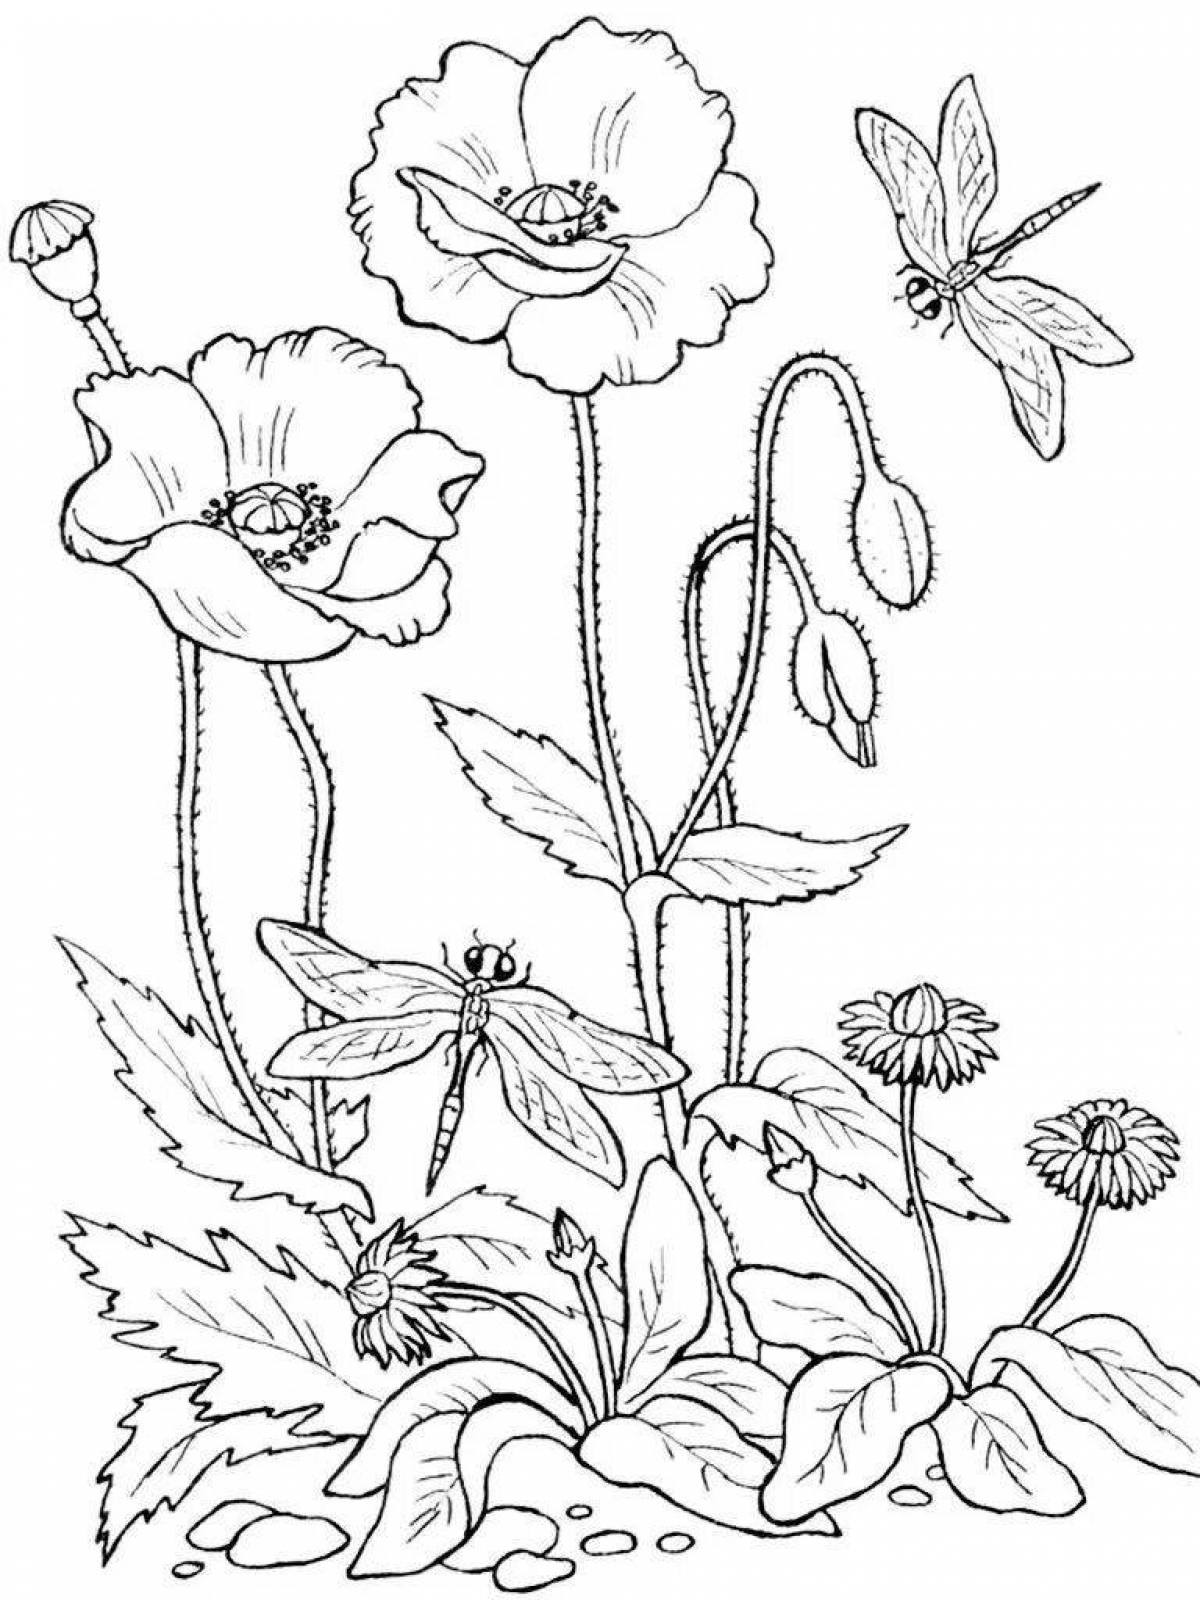 Amazing flower coloring pages for heroes